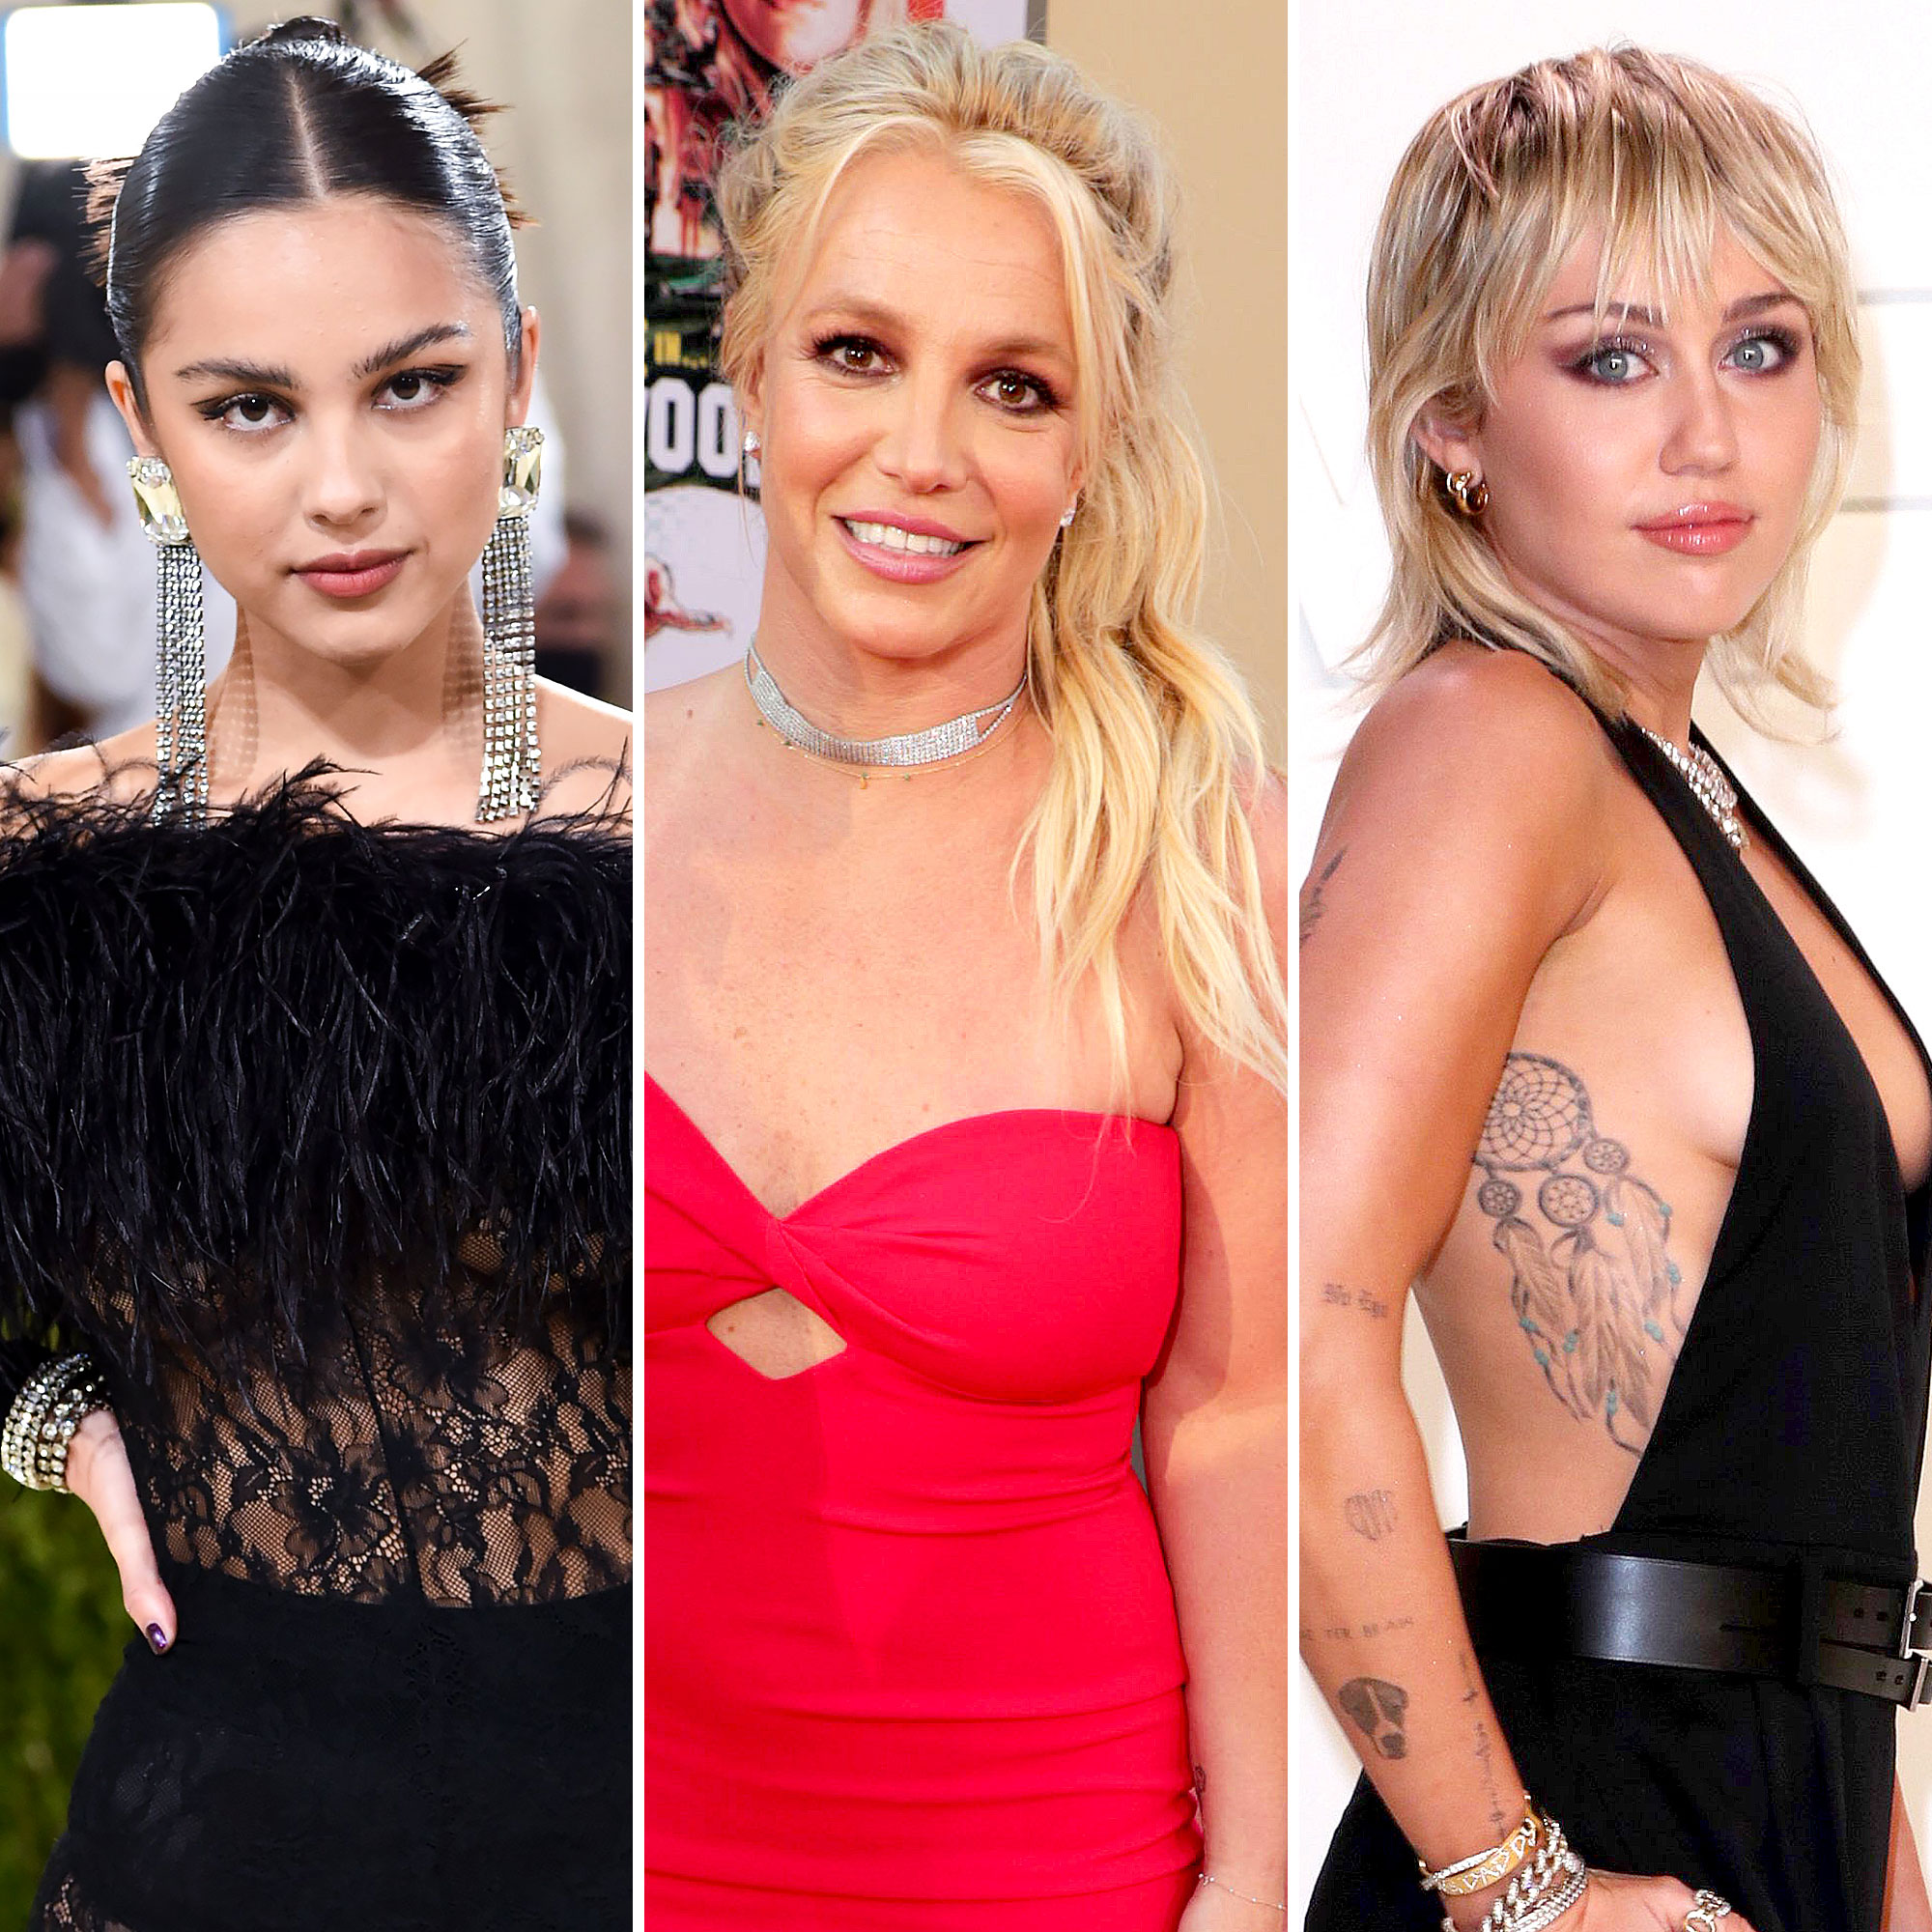 Britney Spears Porn Movie - Paris Hilton, Miley Cyrus, More Celebs Support #FreeBritney Movement